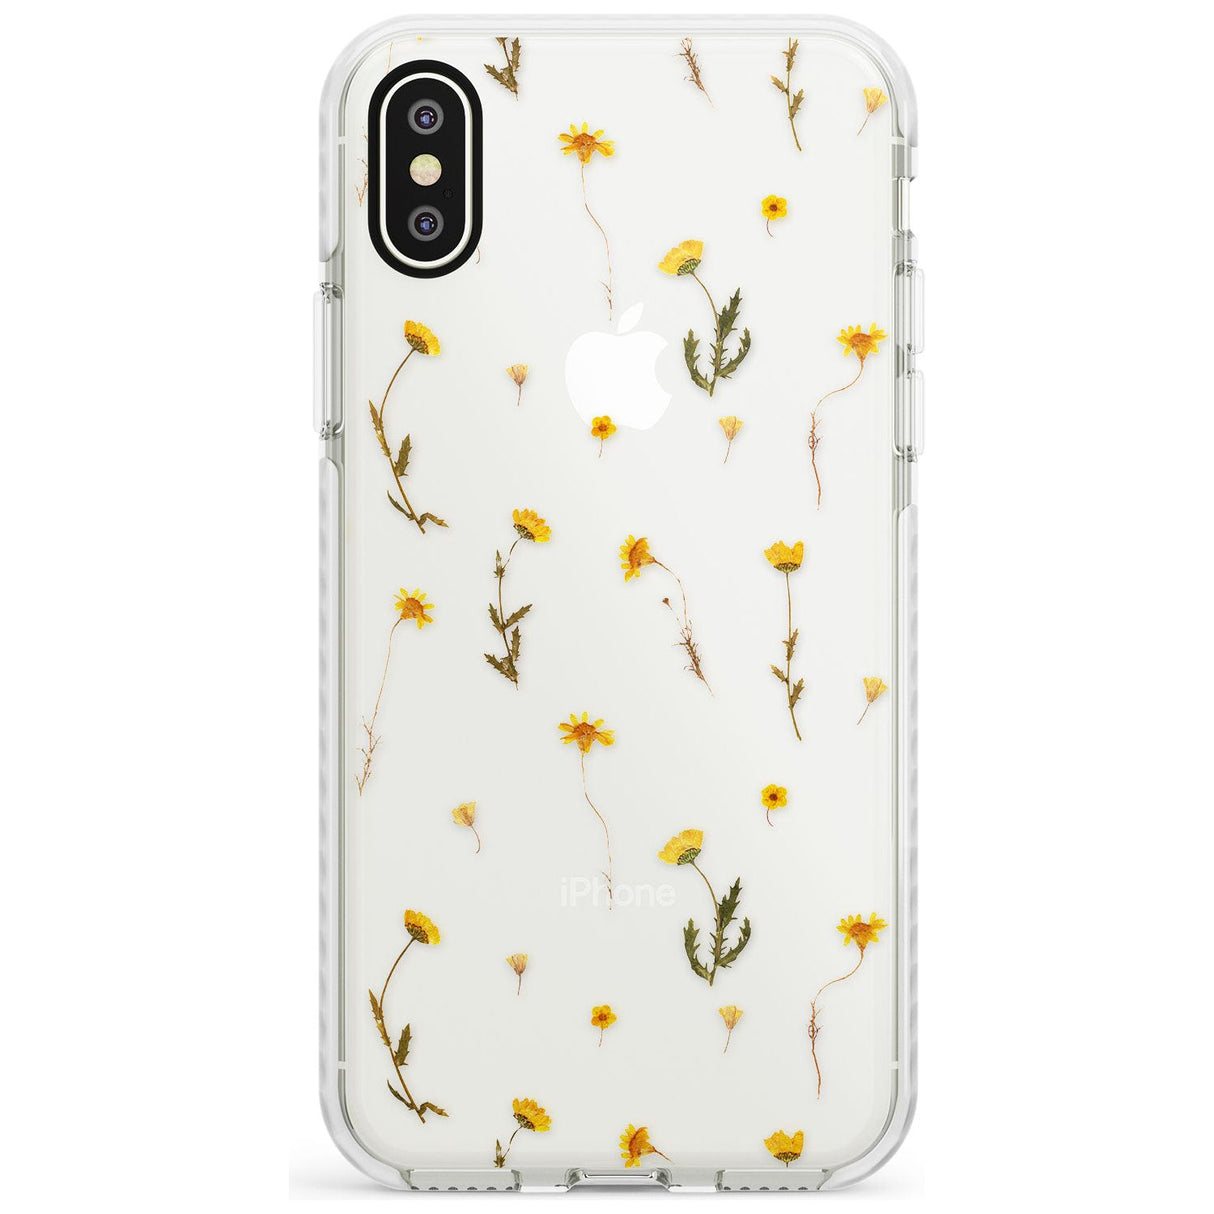 Mixed Yellow Flowers - Dried Flower-Inspired Impact Phone Case for iPhone X XS Max XR